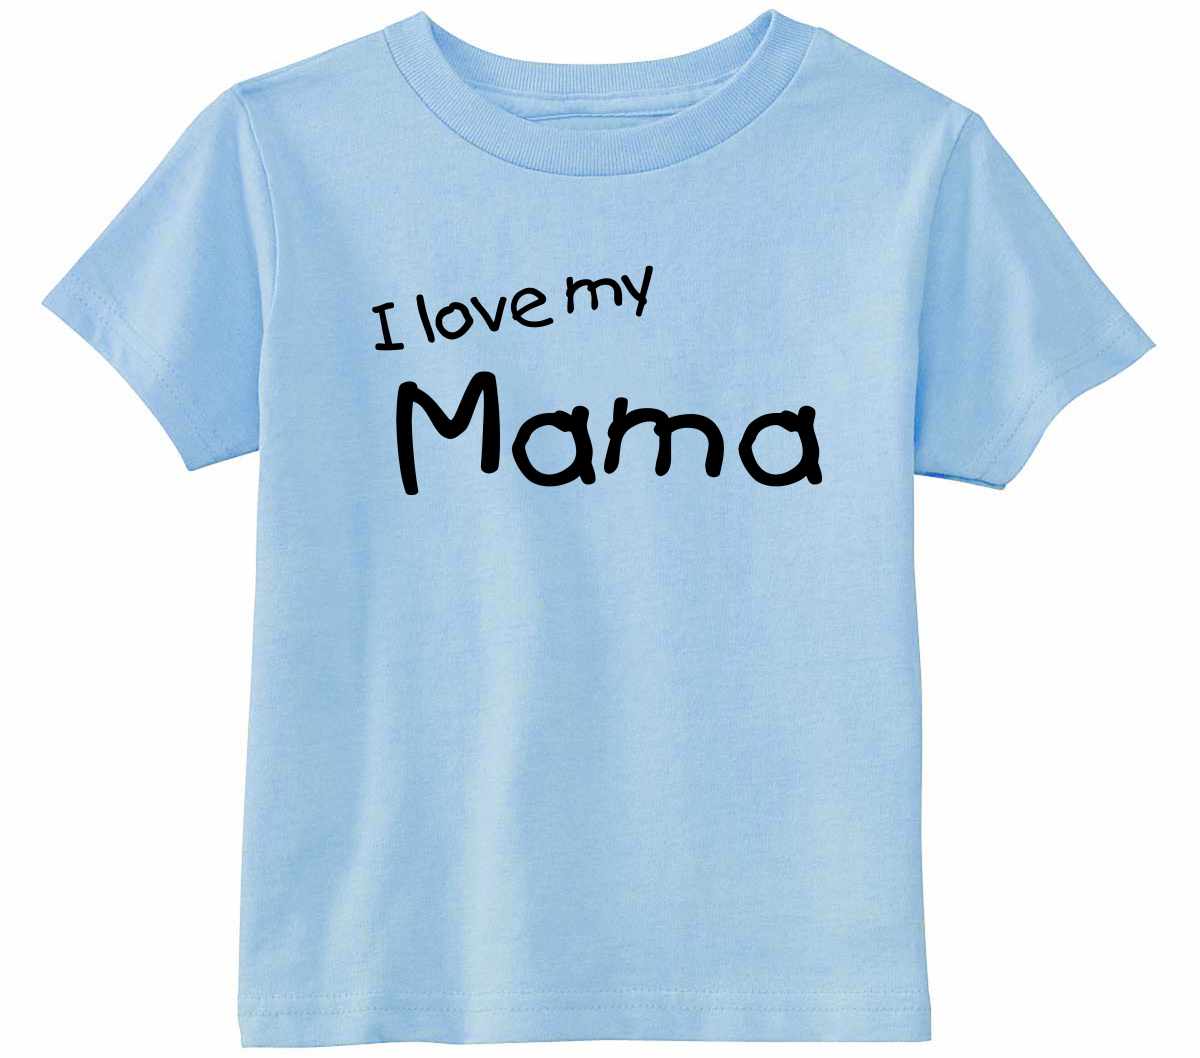 I Love My Mama on Infant-Toddler T-Shirt